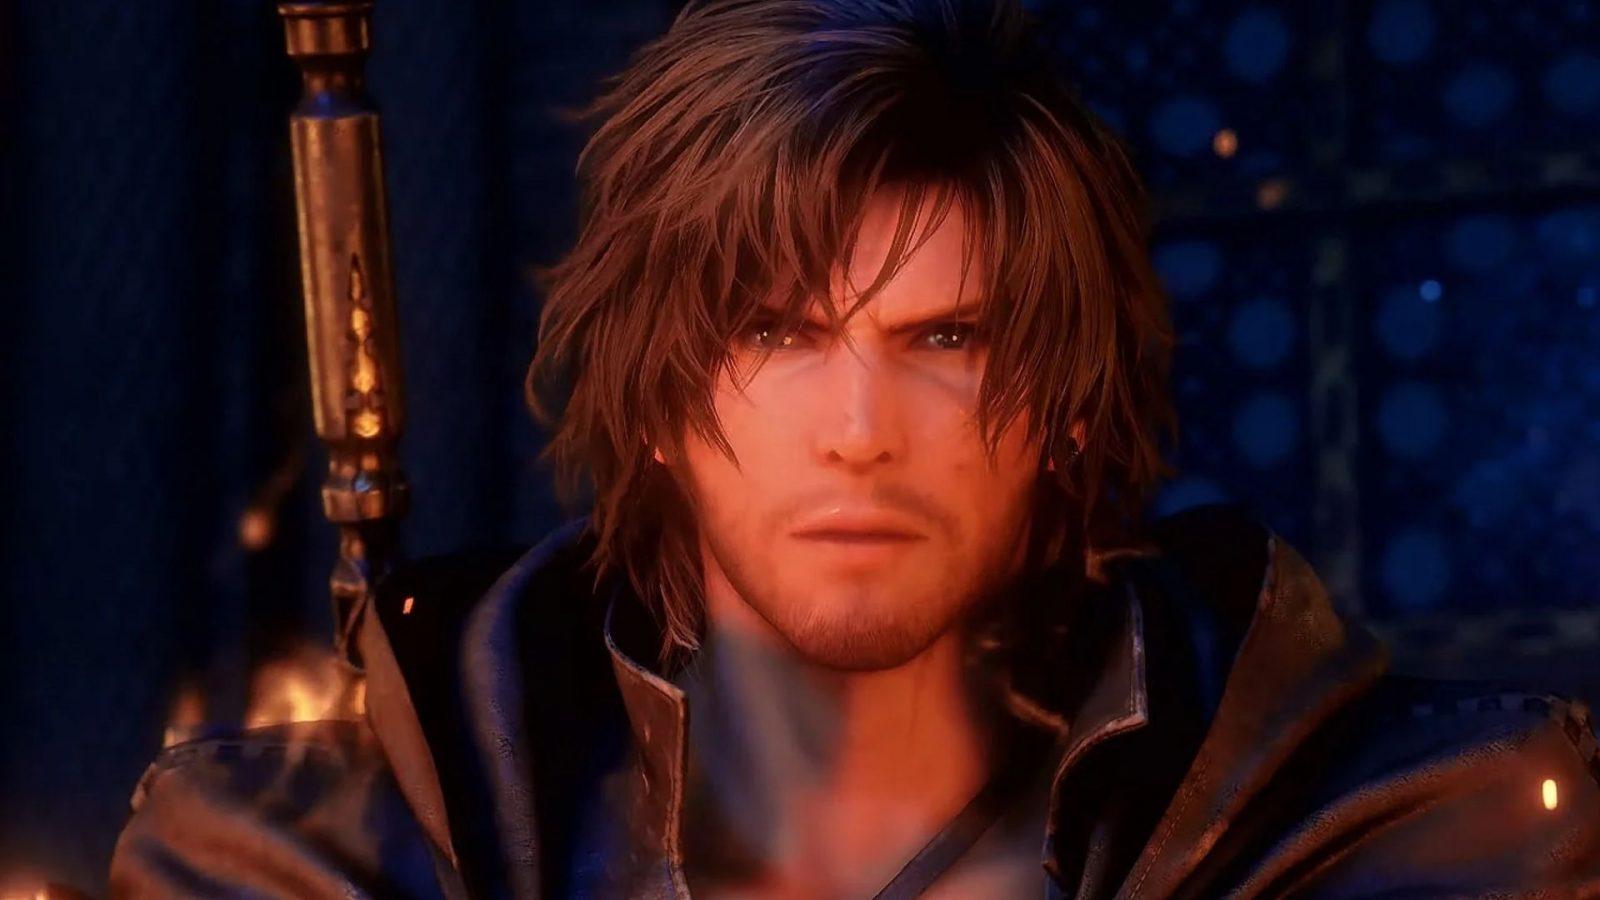 Final Fantasy 16 review bombers claim game “completely betrays